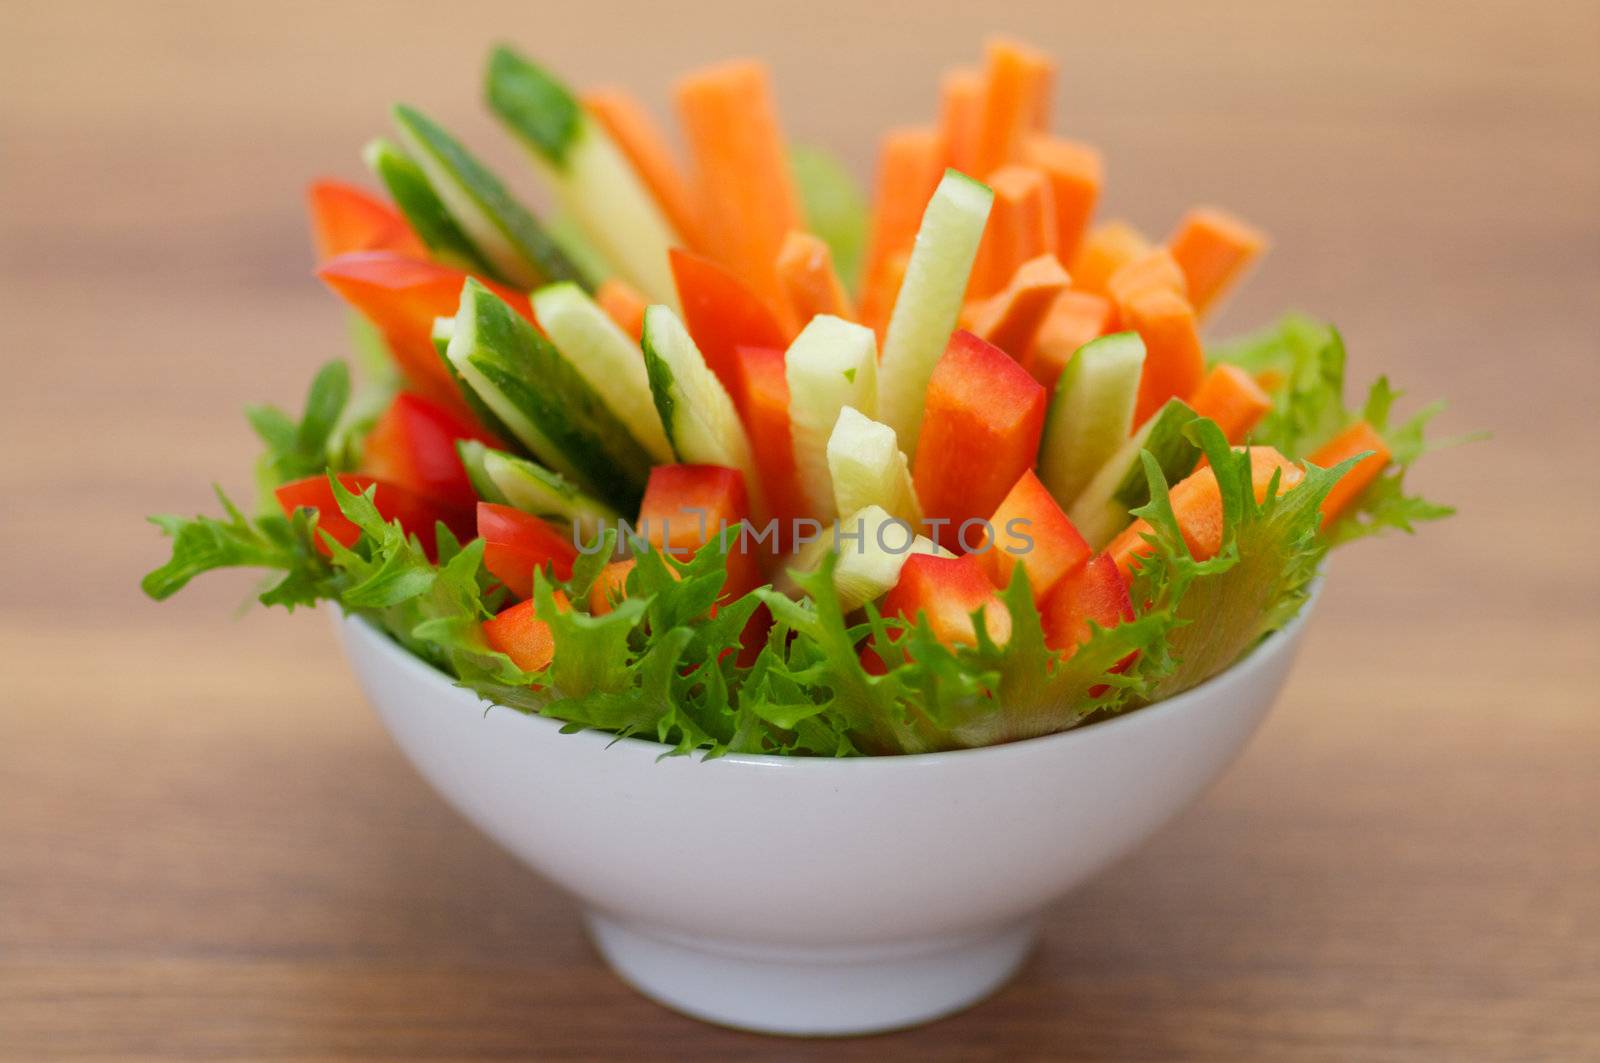 Red Bell pepper, cucumber and carrots straws with salad leaves by zhekos